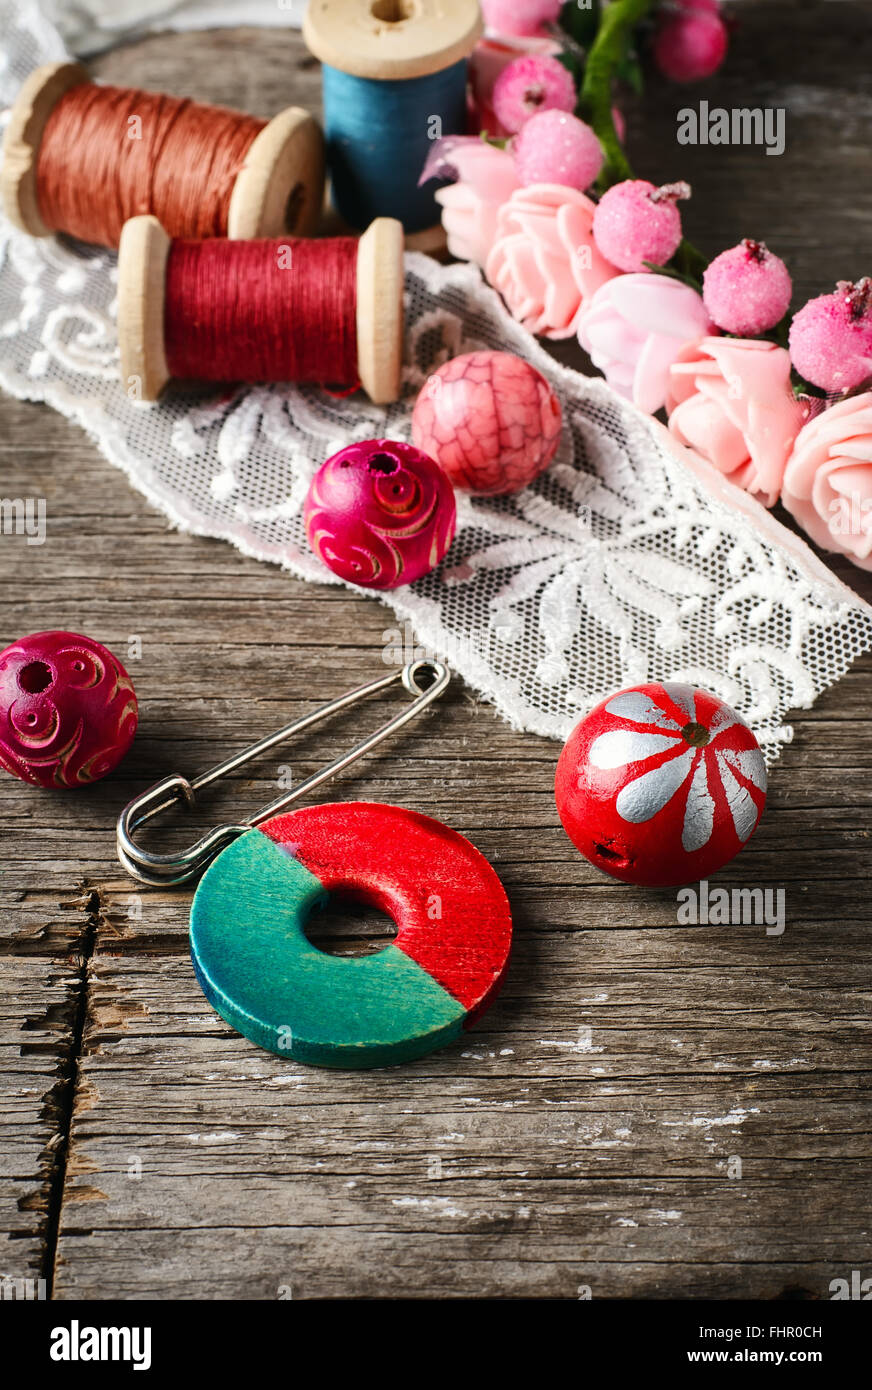 Beads and spool of thread, piece of lace on textured wooden background Stock Photo